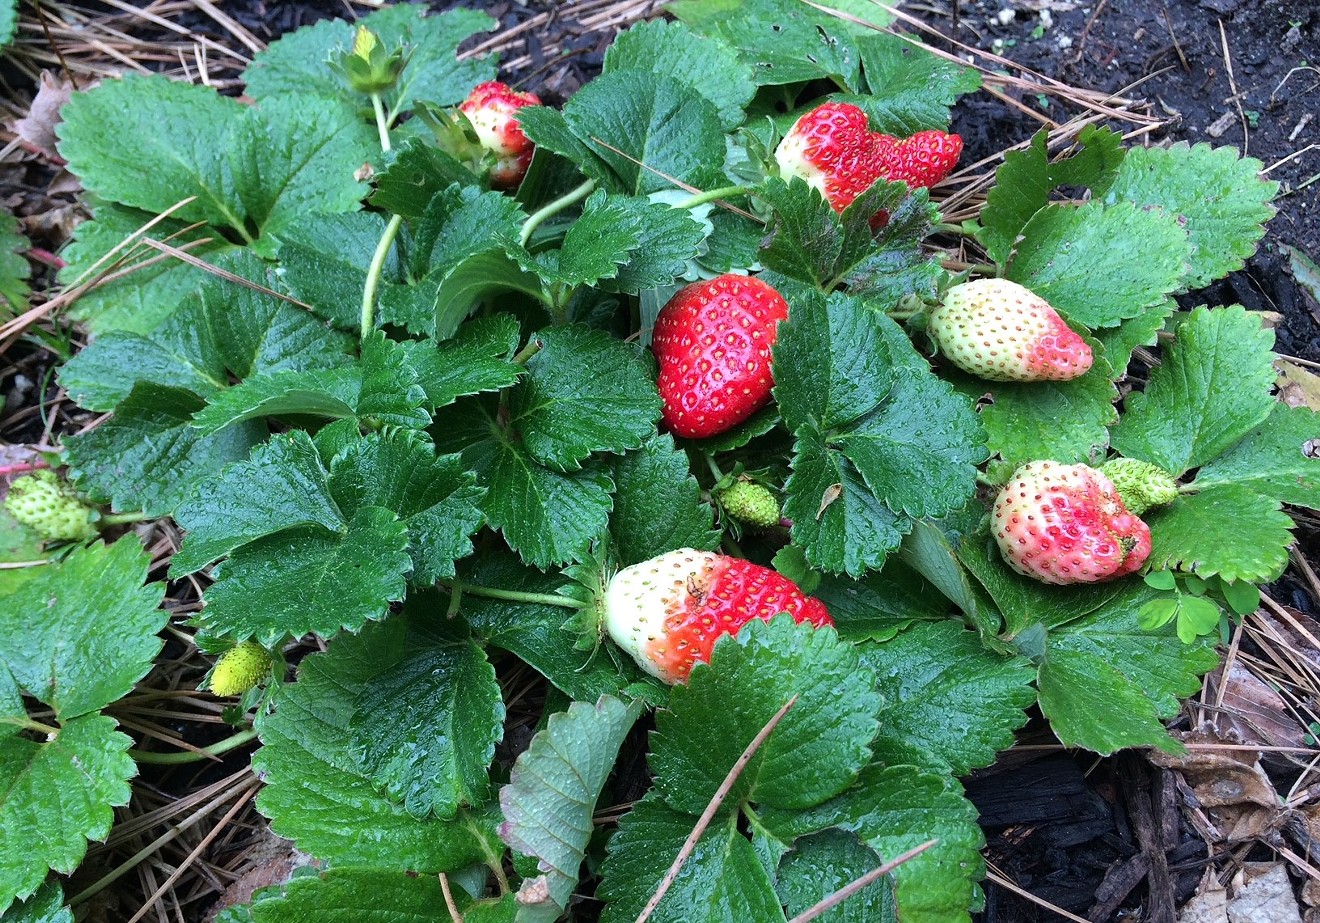 Strawberries are coming soon.